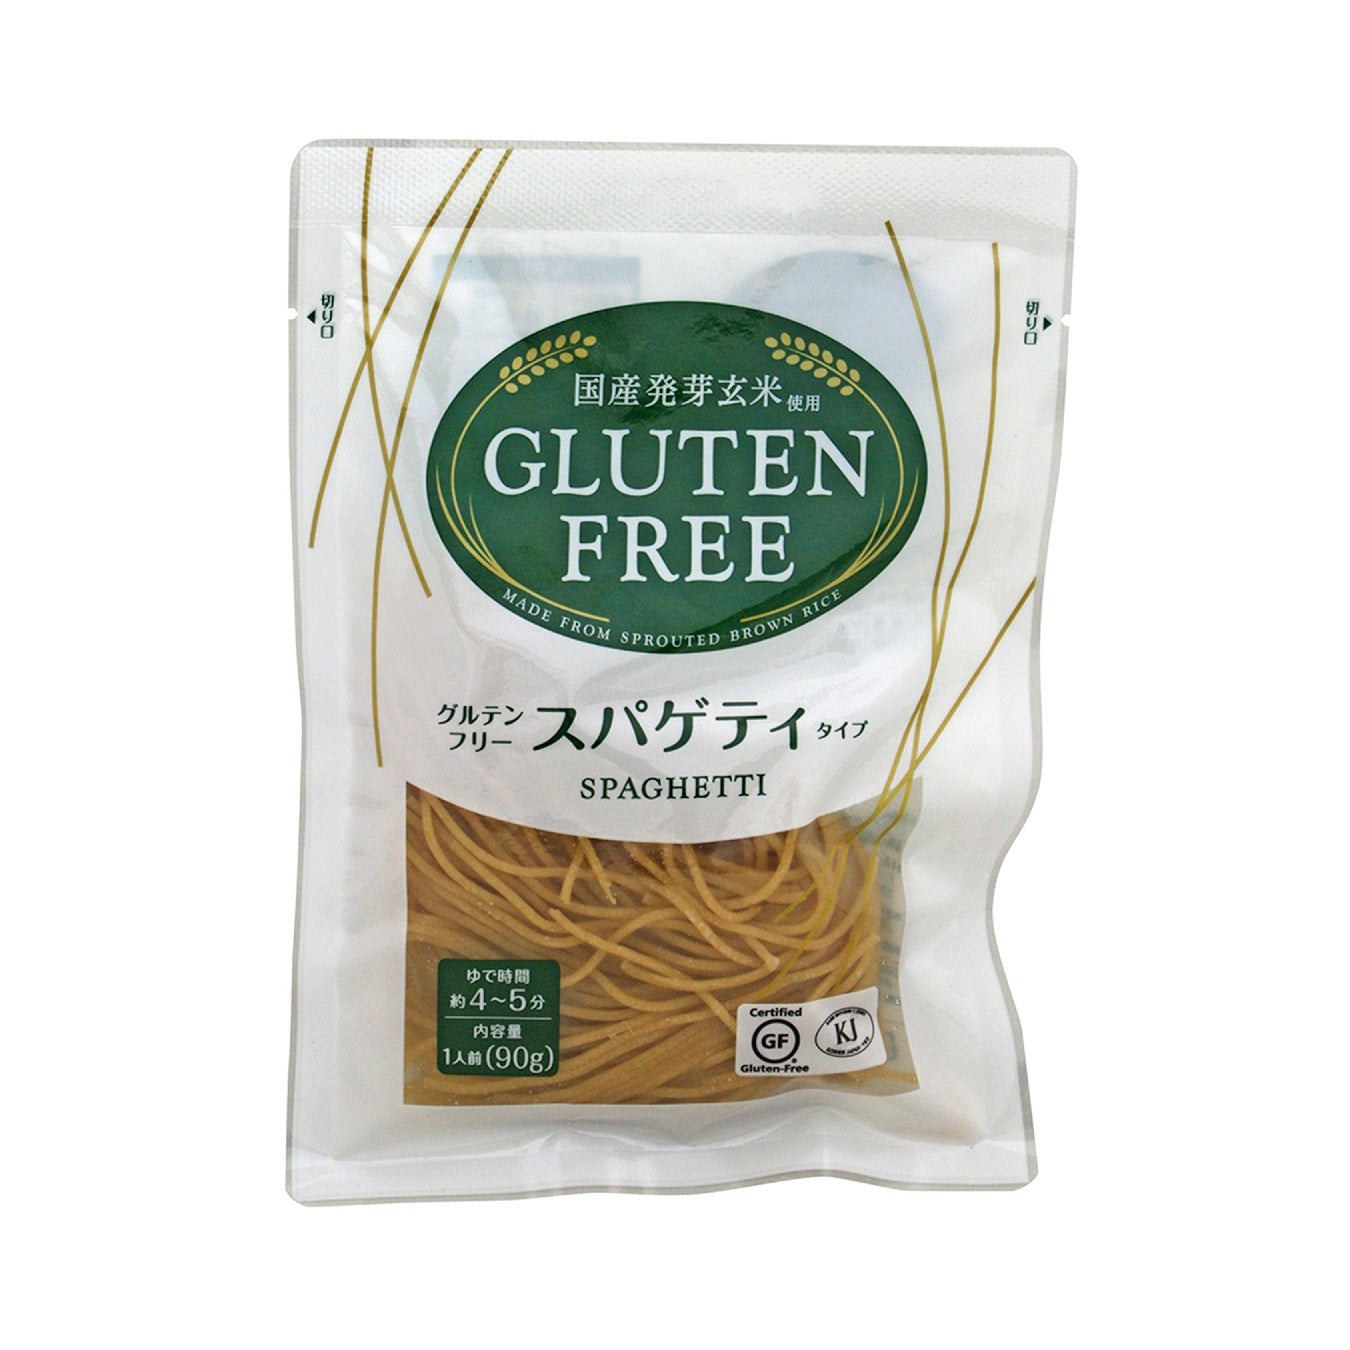 Gluten Free Pasta - Made from Sprouted Brown Rice